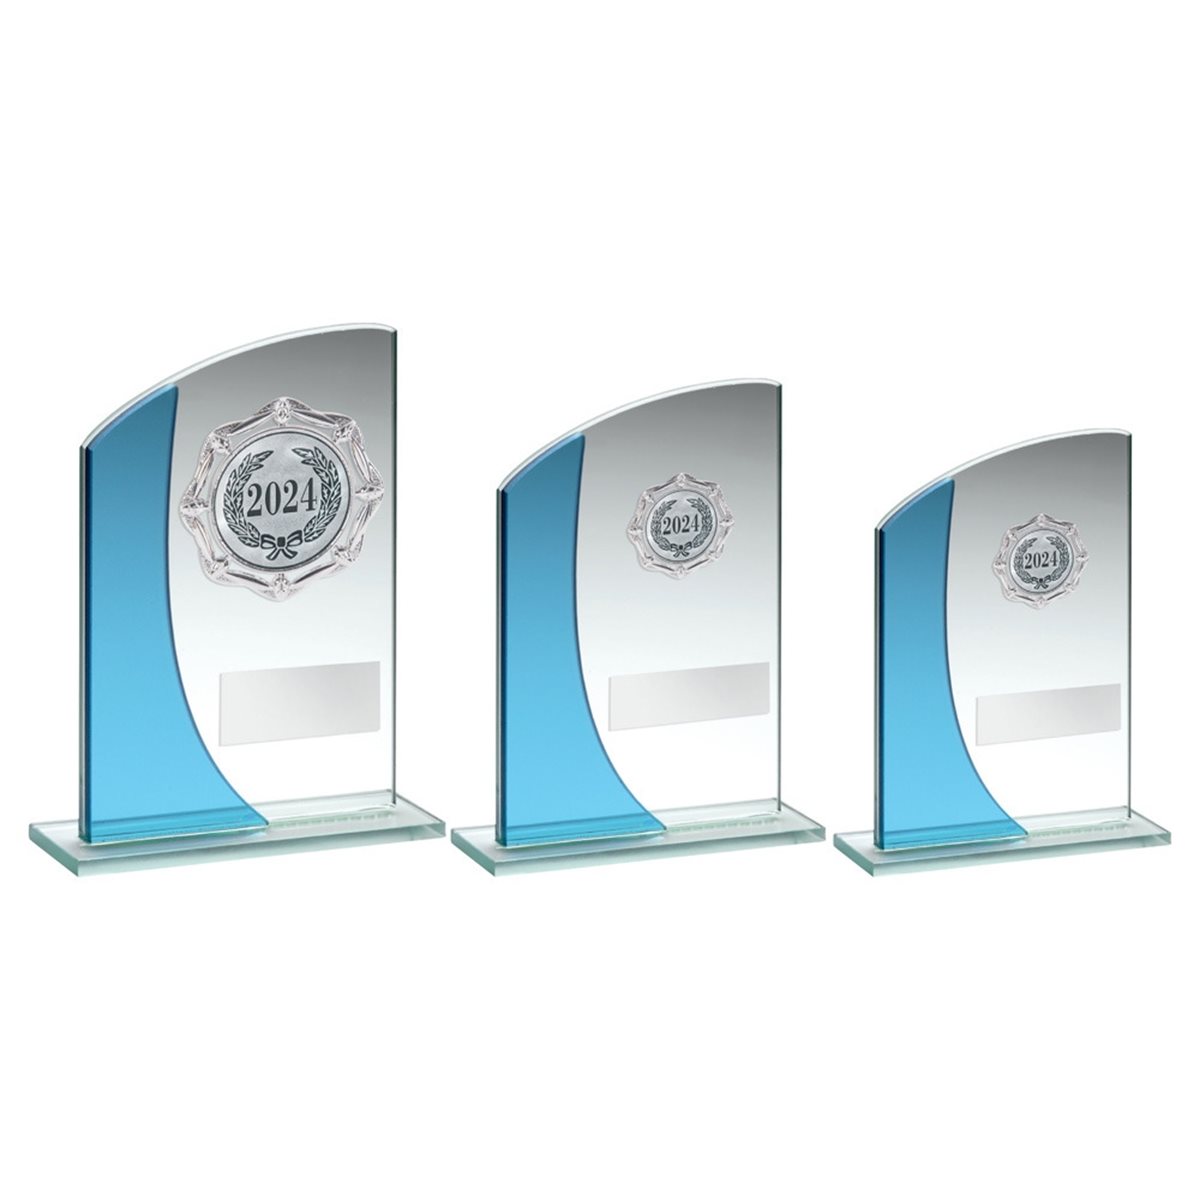 Blue Curved Glass Award with Silver Trim JR17-TY124